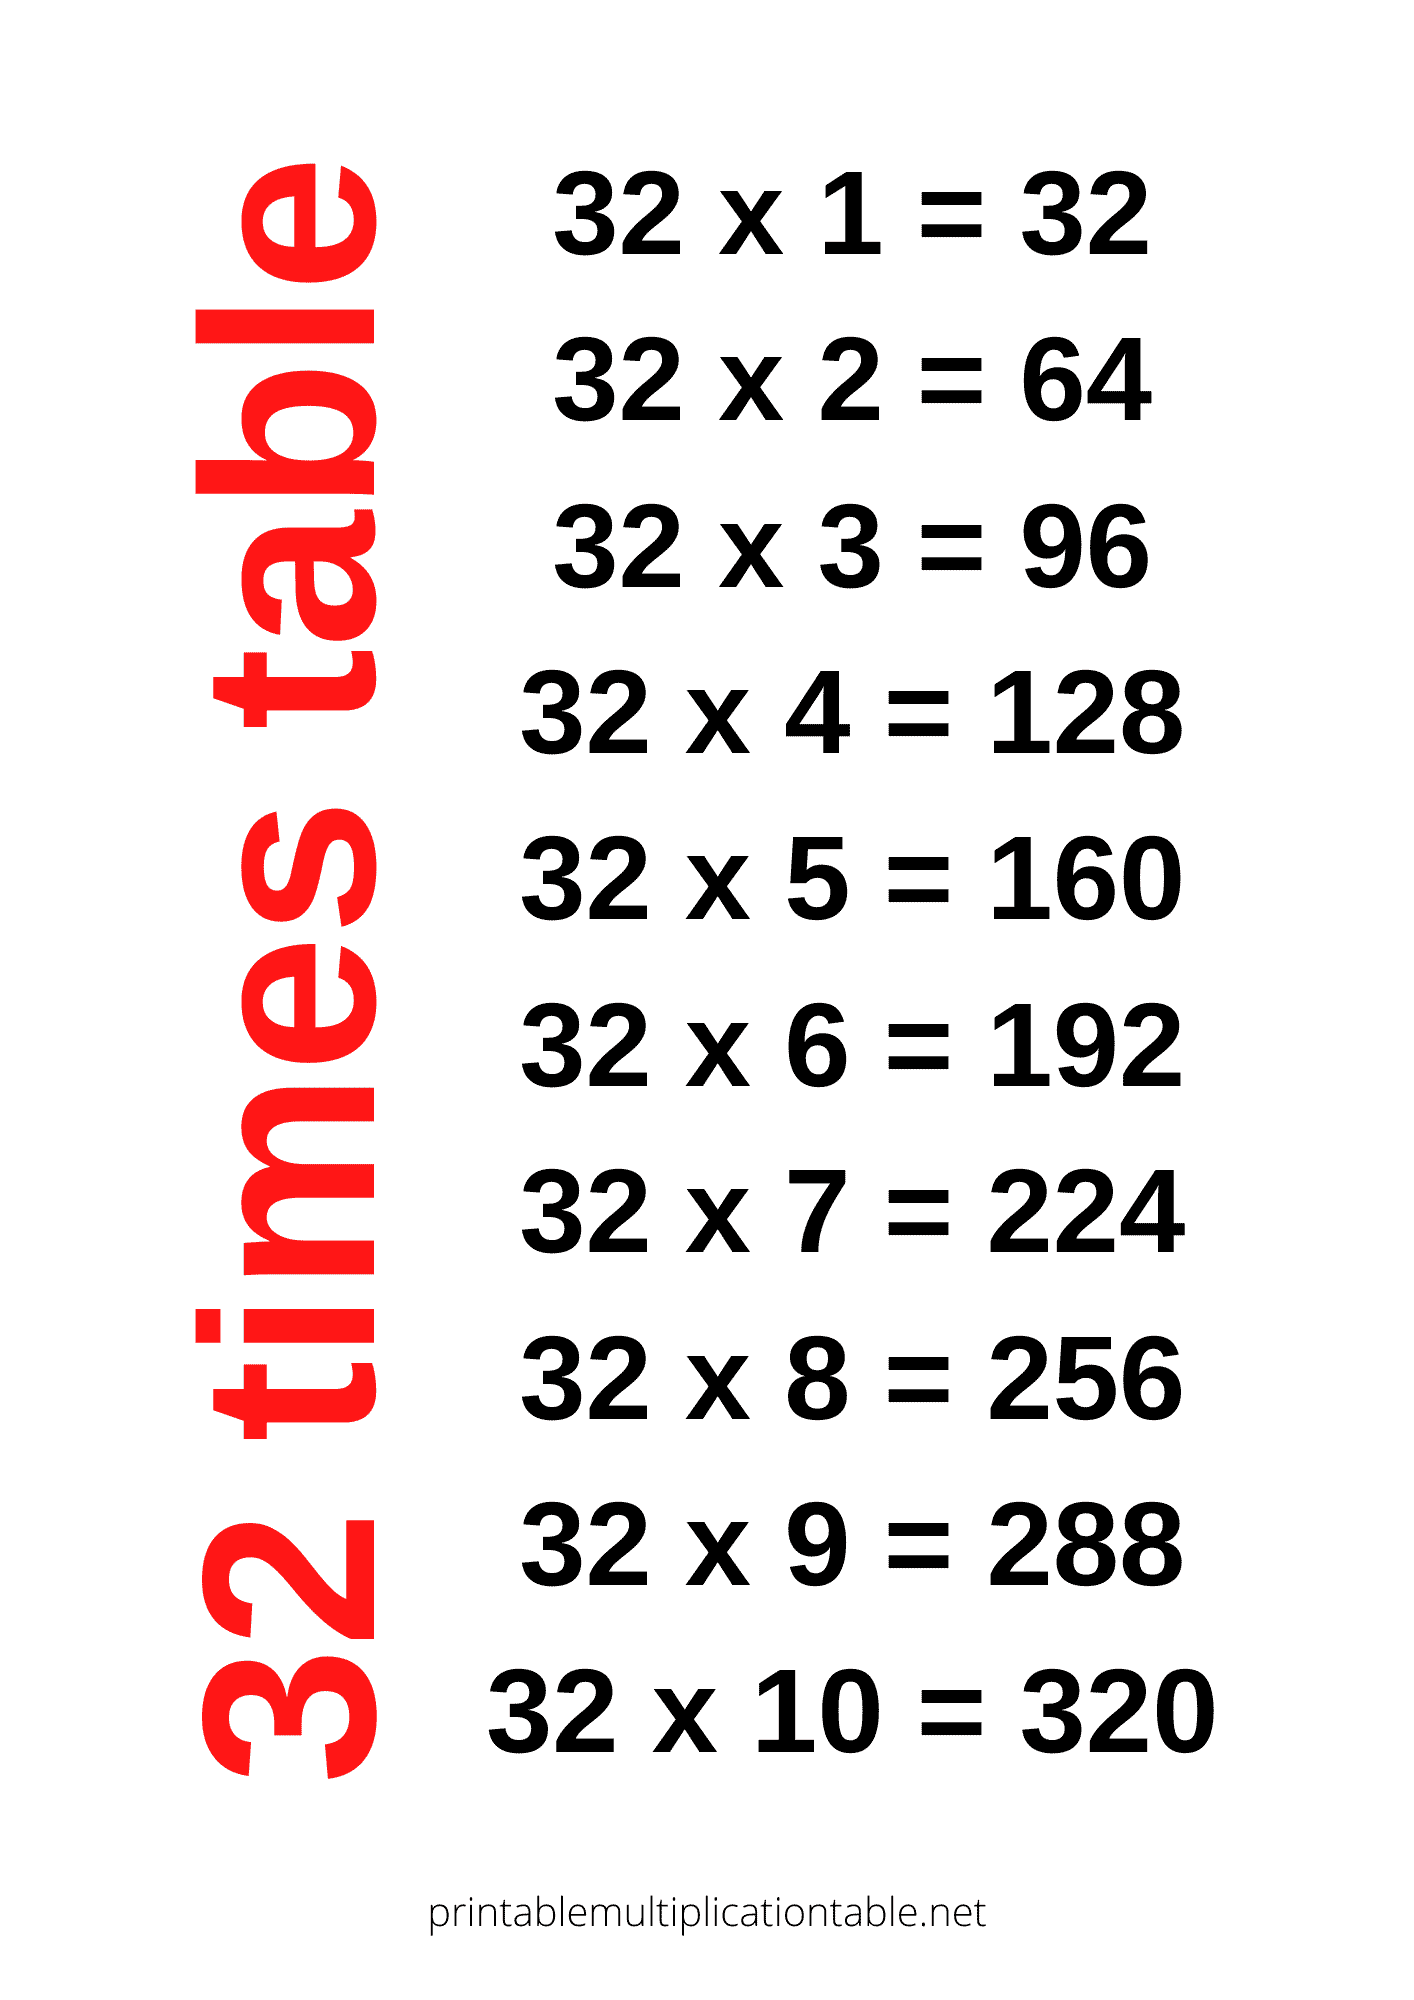 32 times table chart